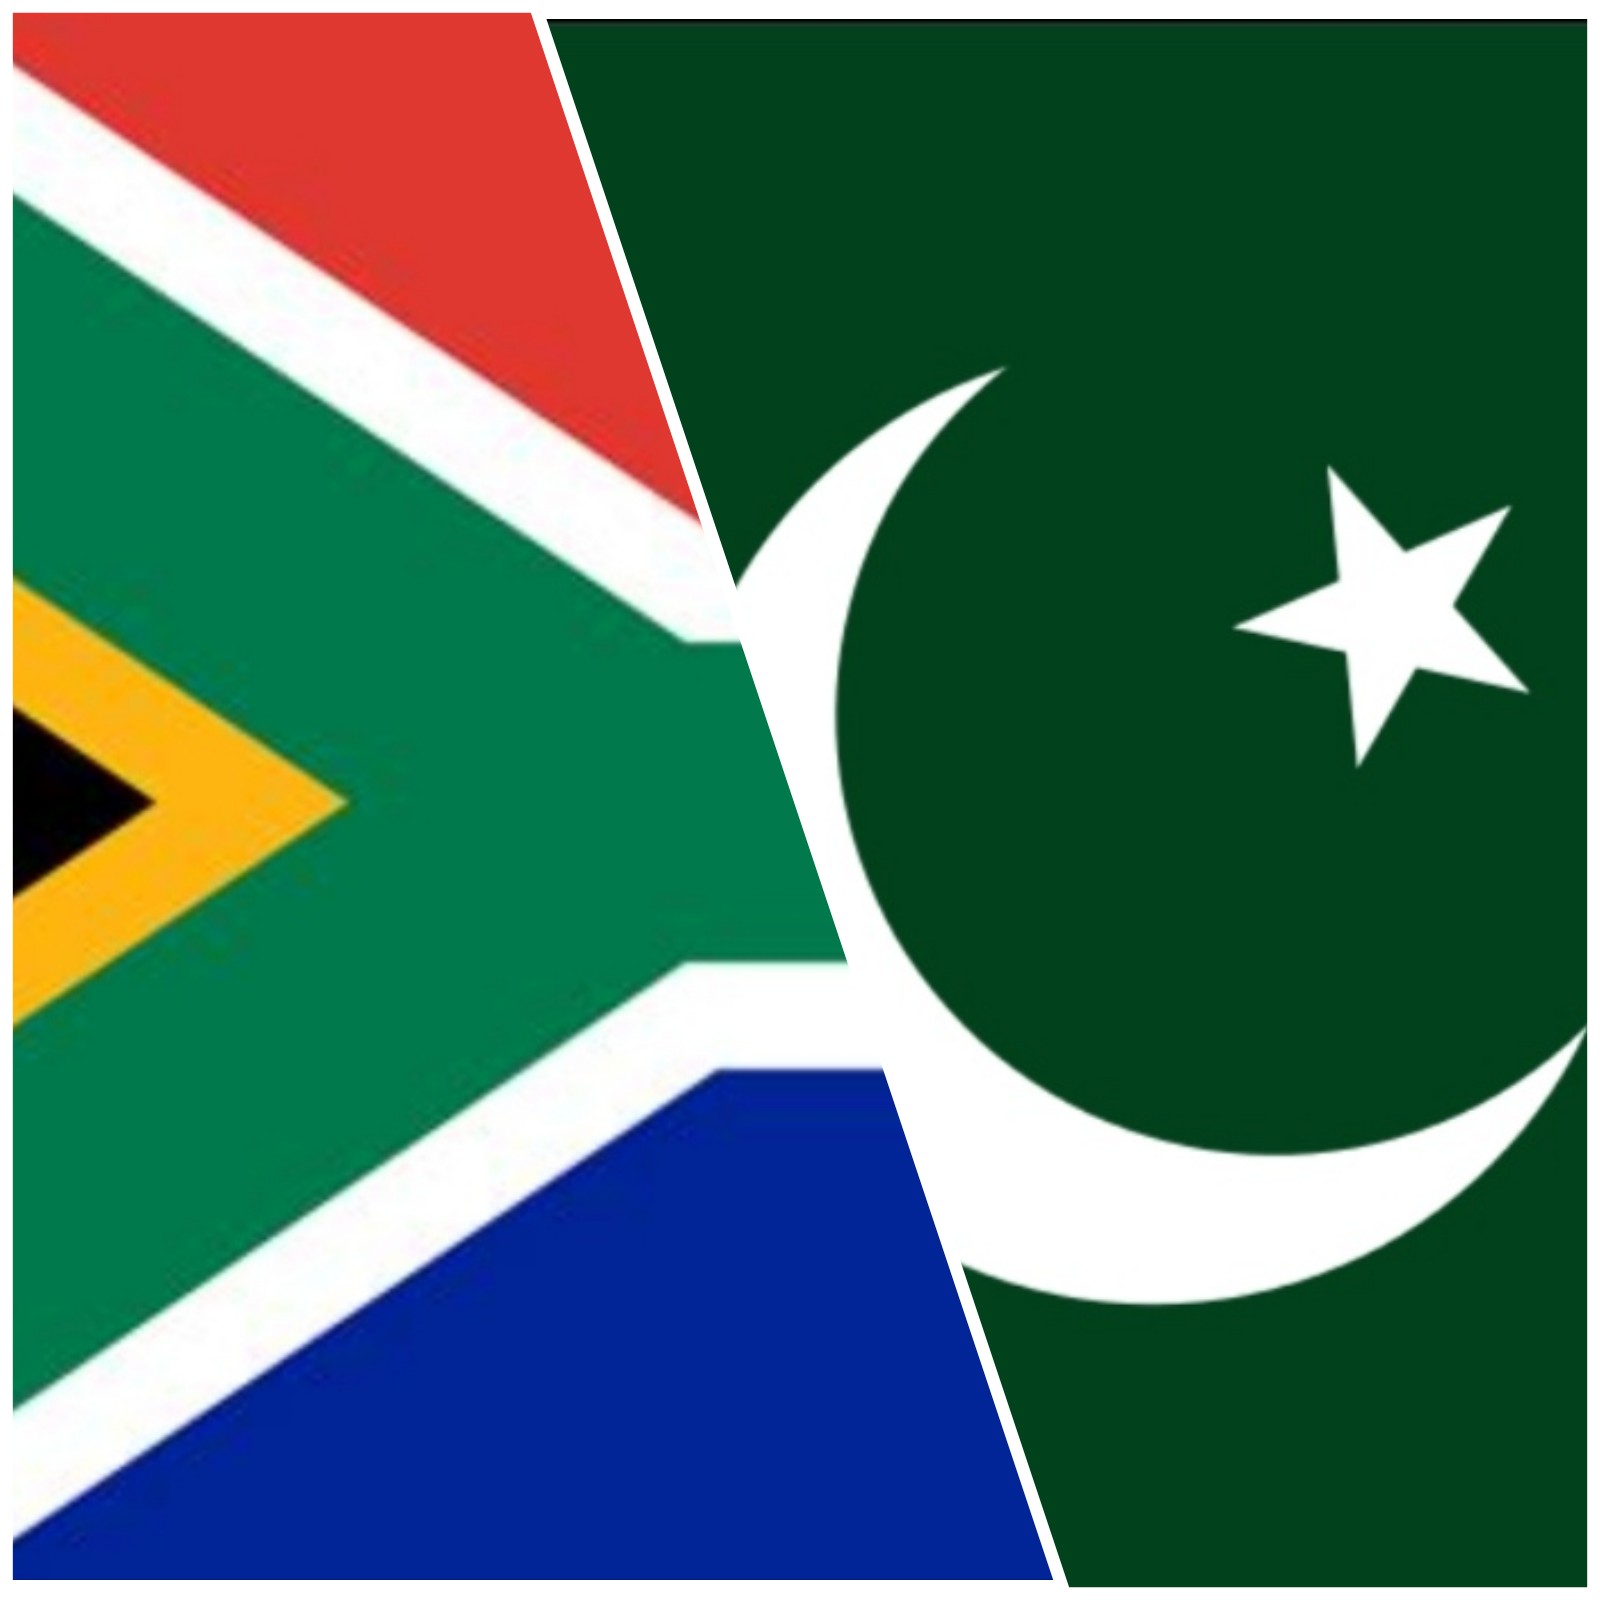 Why South Africa Should Embrace Pakistan’s “Look Africa” Policy